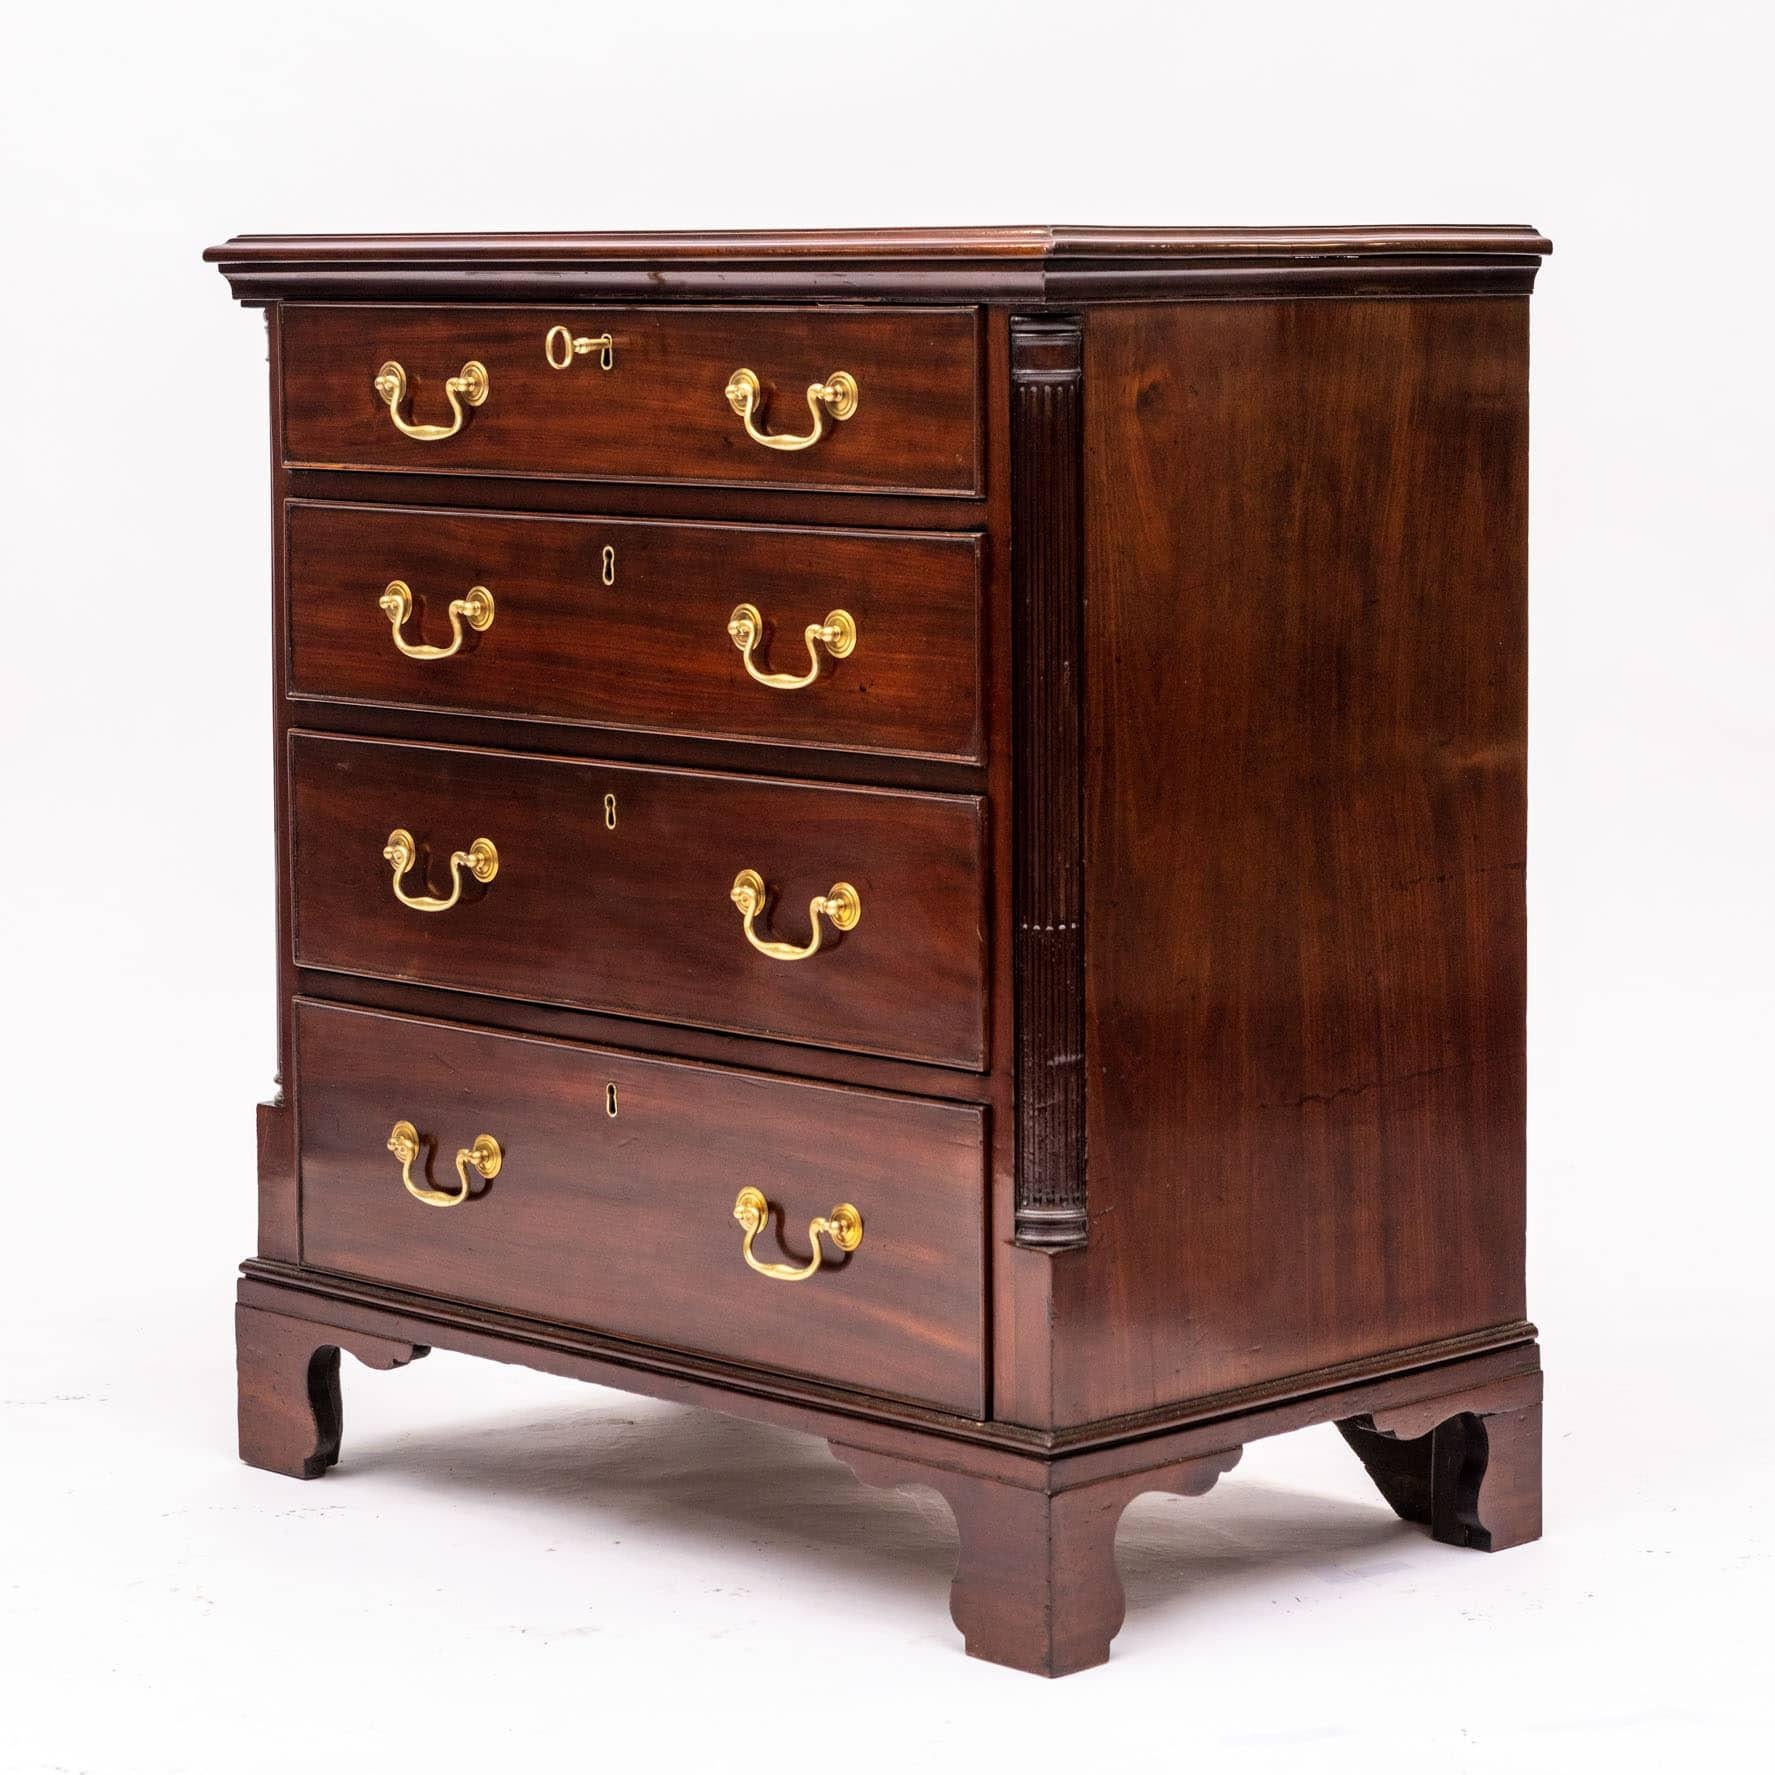 Louis XVI Chest Of Drawers, Mahogany. Copenhagen 1780 - 1790. In Good Condition For Sale In Kastrup, DK